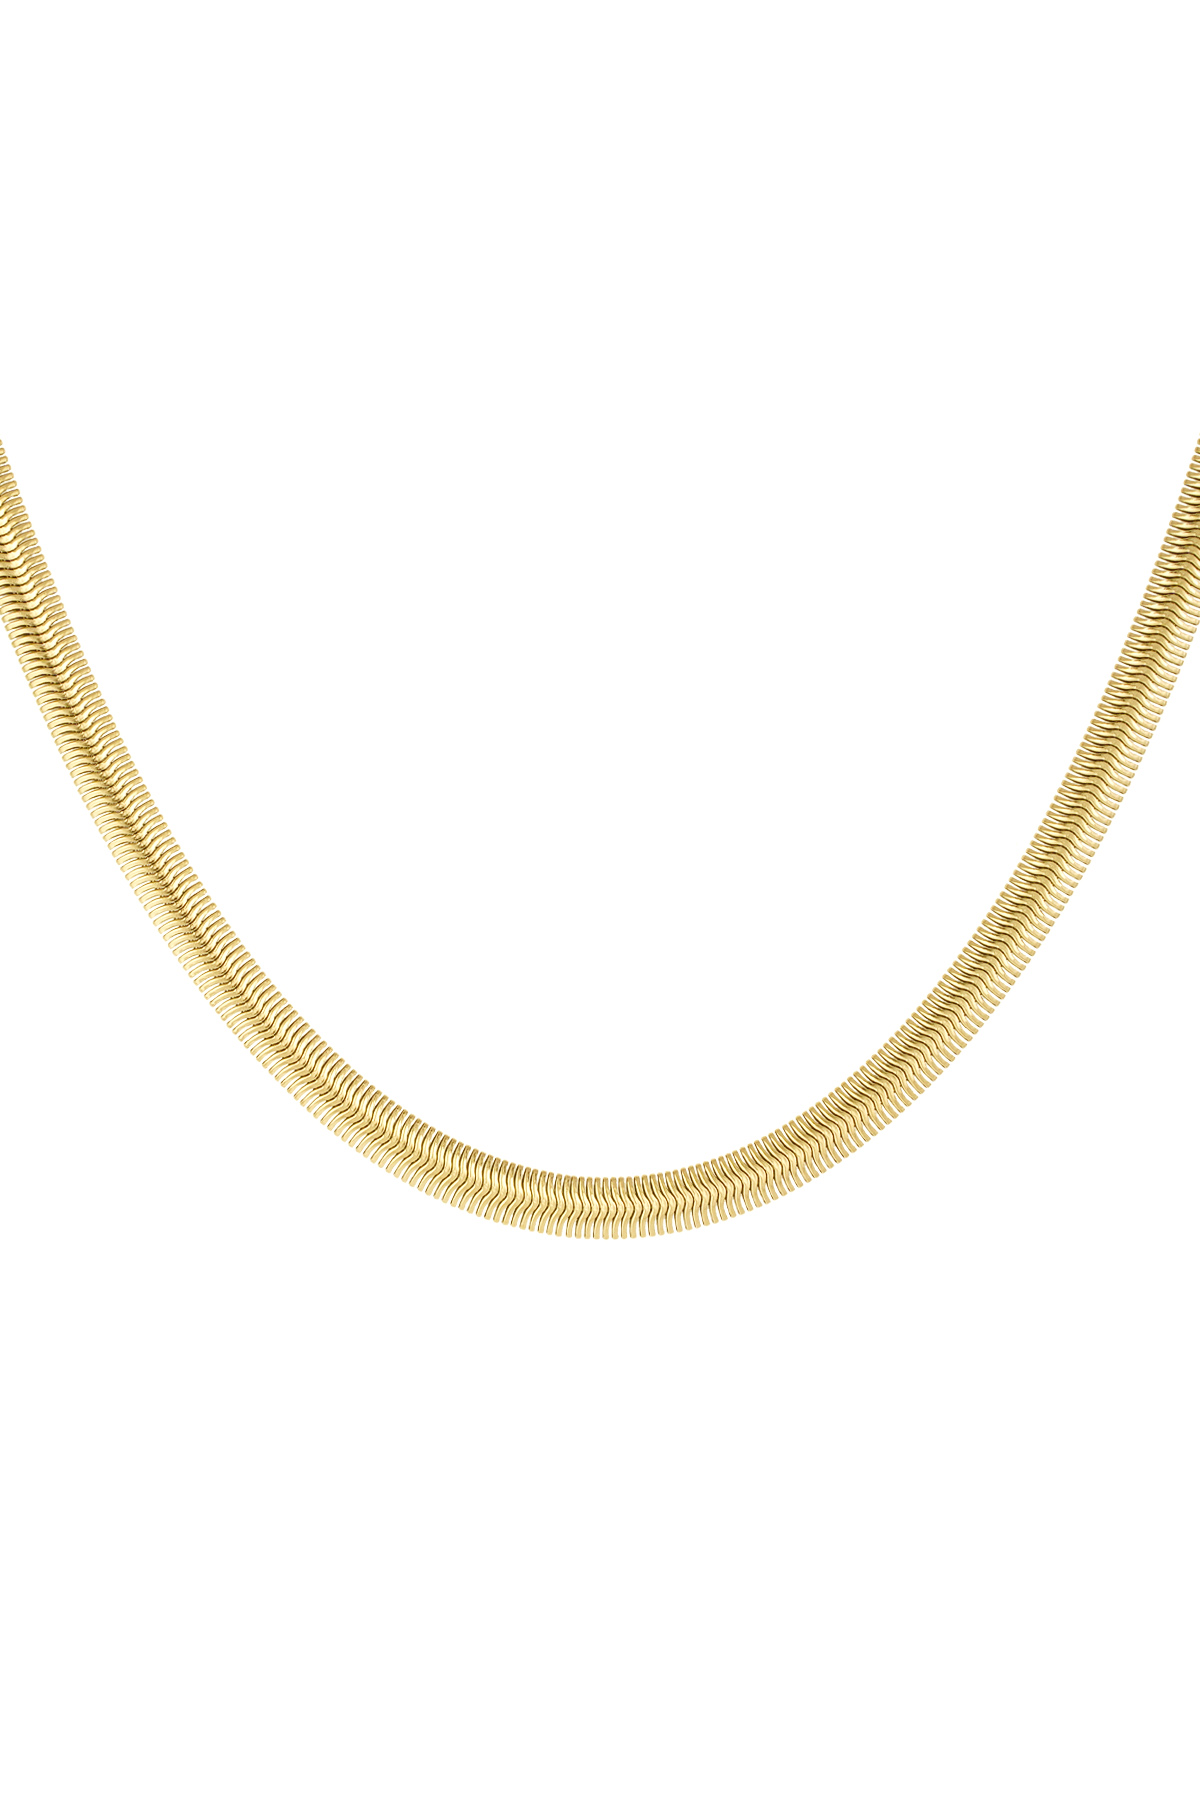 Necklace flat with print - gold-6.0MM h5 